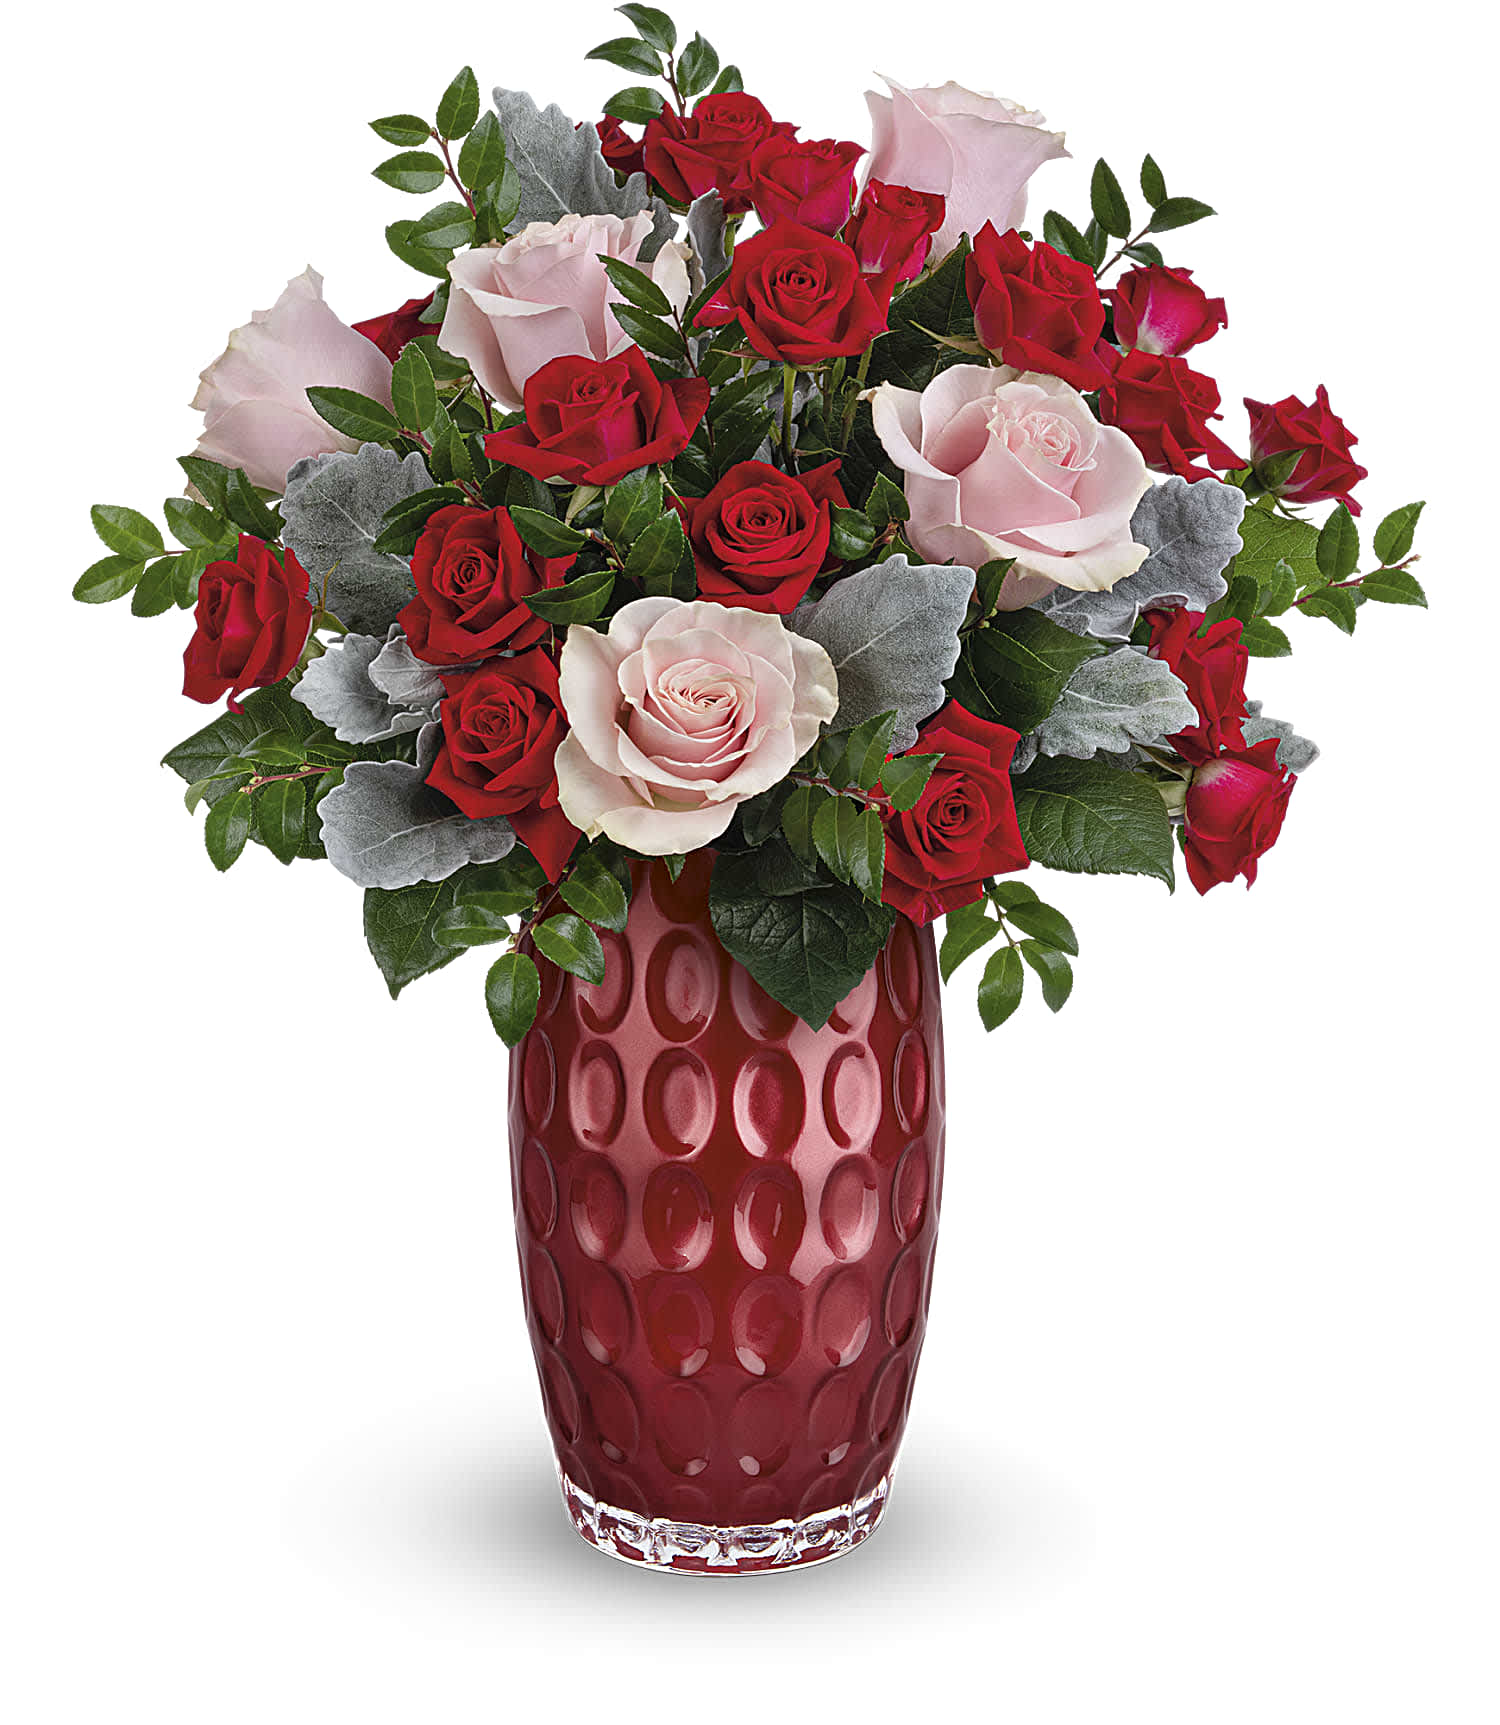 TEL Love Always Bouquet - Pink roses and red spray roses are accented with dusty miller and huckleberry - a perfect choice for Valentine's Day. Teleflora's Love Always Bouquet is delivered in Teleflora's Love Always Vase.   Standard: Approximately 16&quot; W x 18 &quot; H Deluxe: Approximately 16&quot; W x 18 1/2&quot; H Premium:  Approximately 16 1/2&quot; W x 19&quot; H